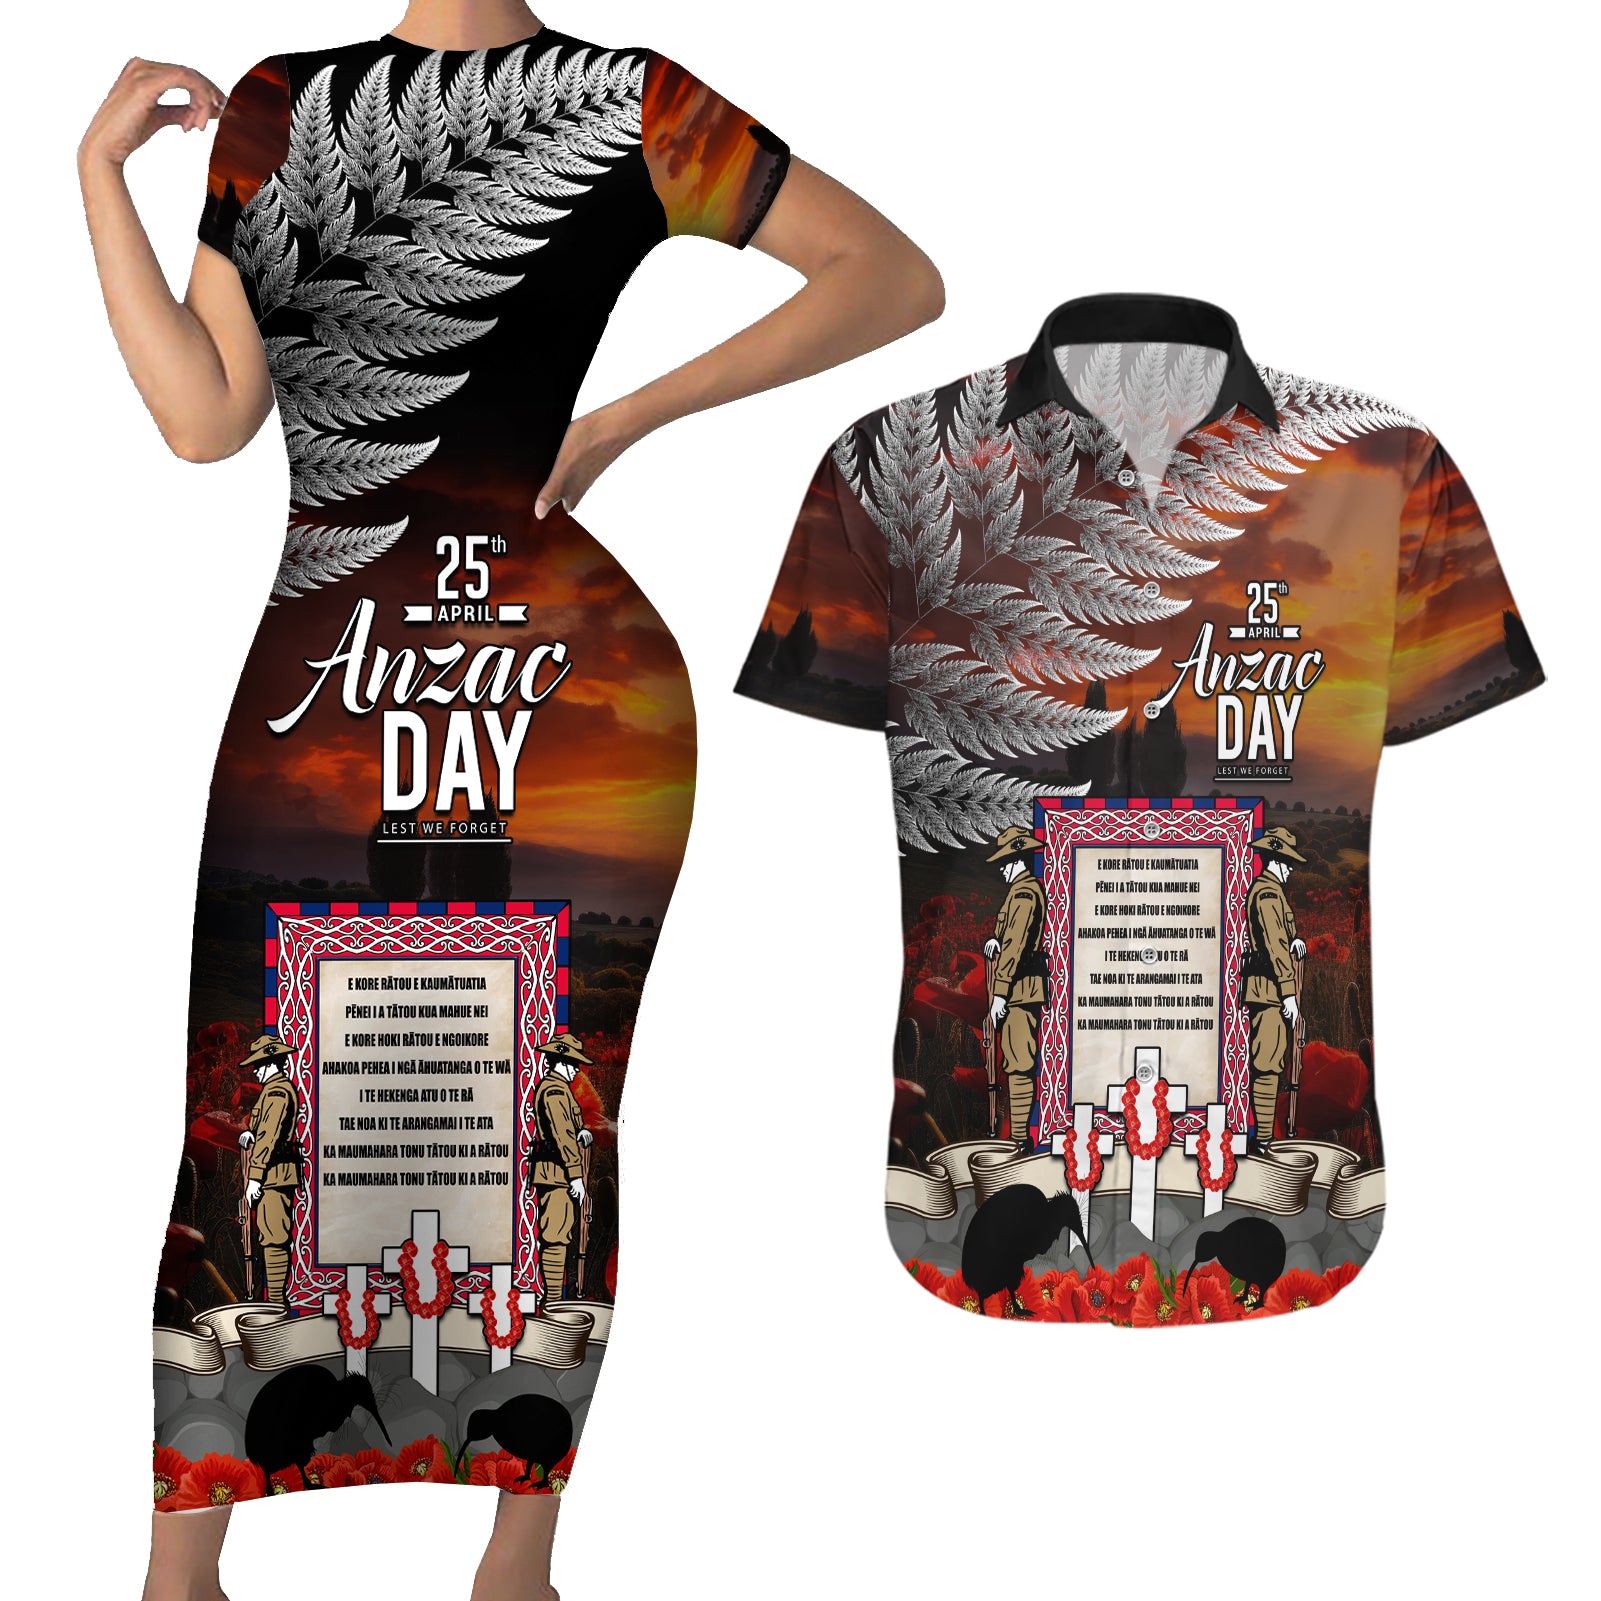 New Zealand ANZAC Day Couples Matching Short Sleeve Bodycon Dress and Hawaiian Shirt The Ode of Remembrance and Silver Fern